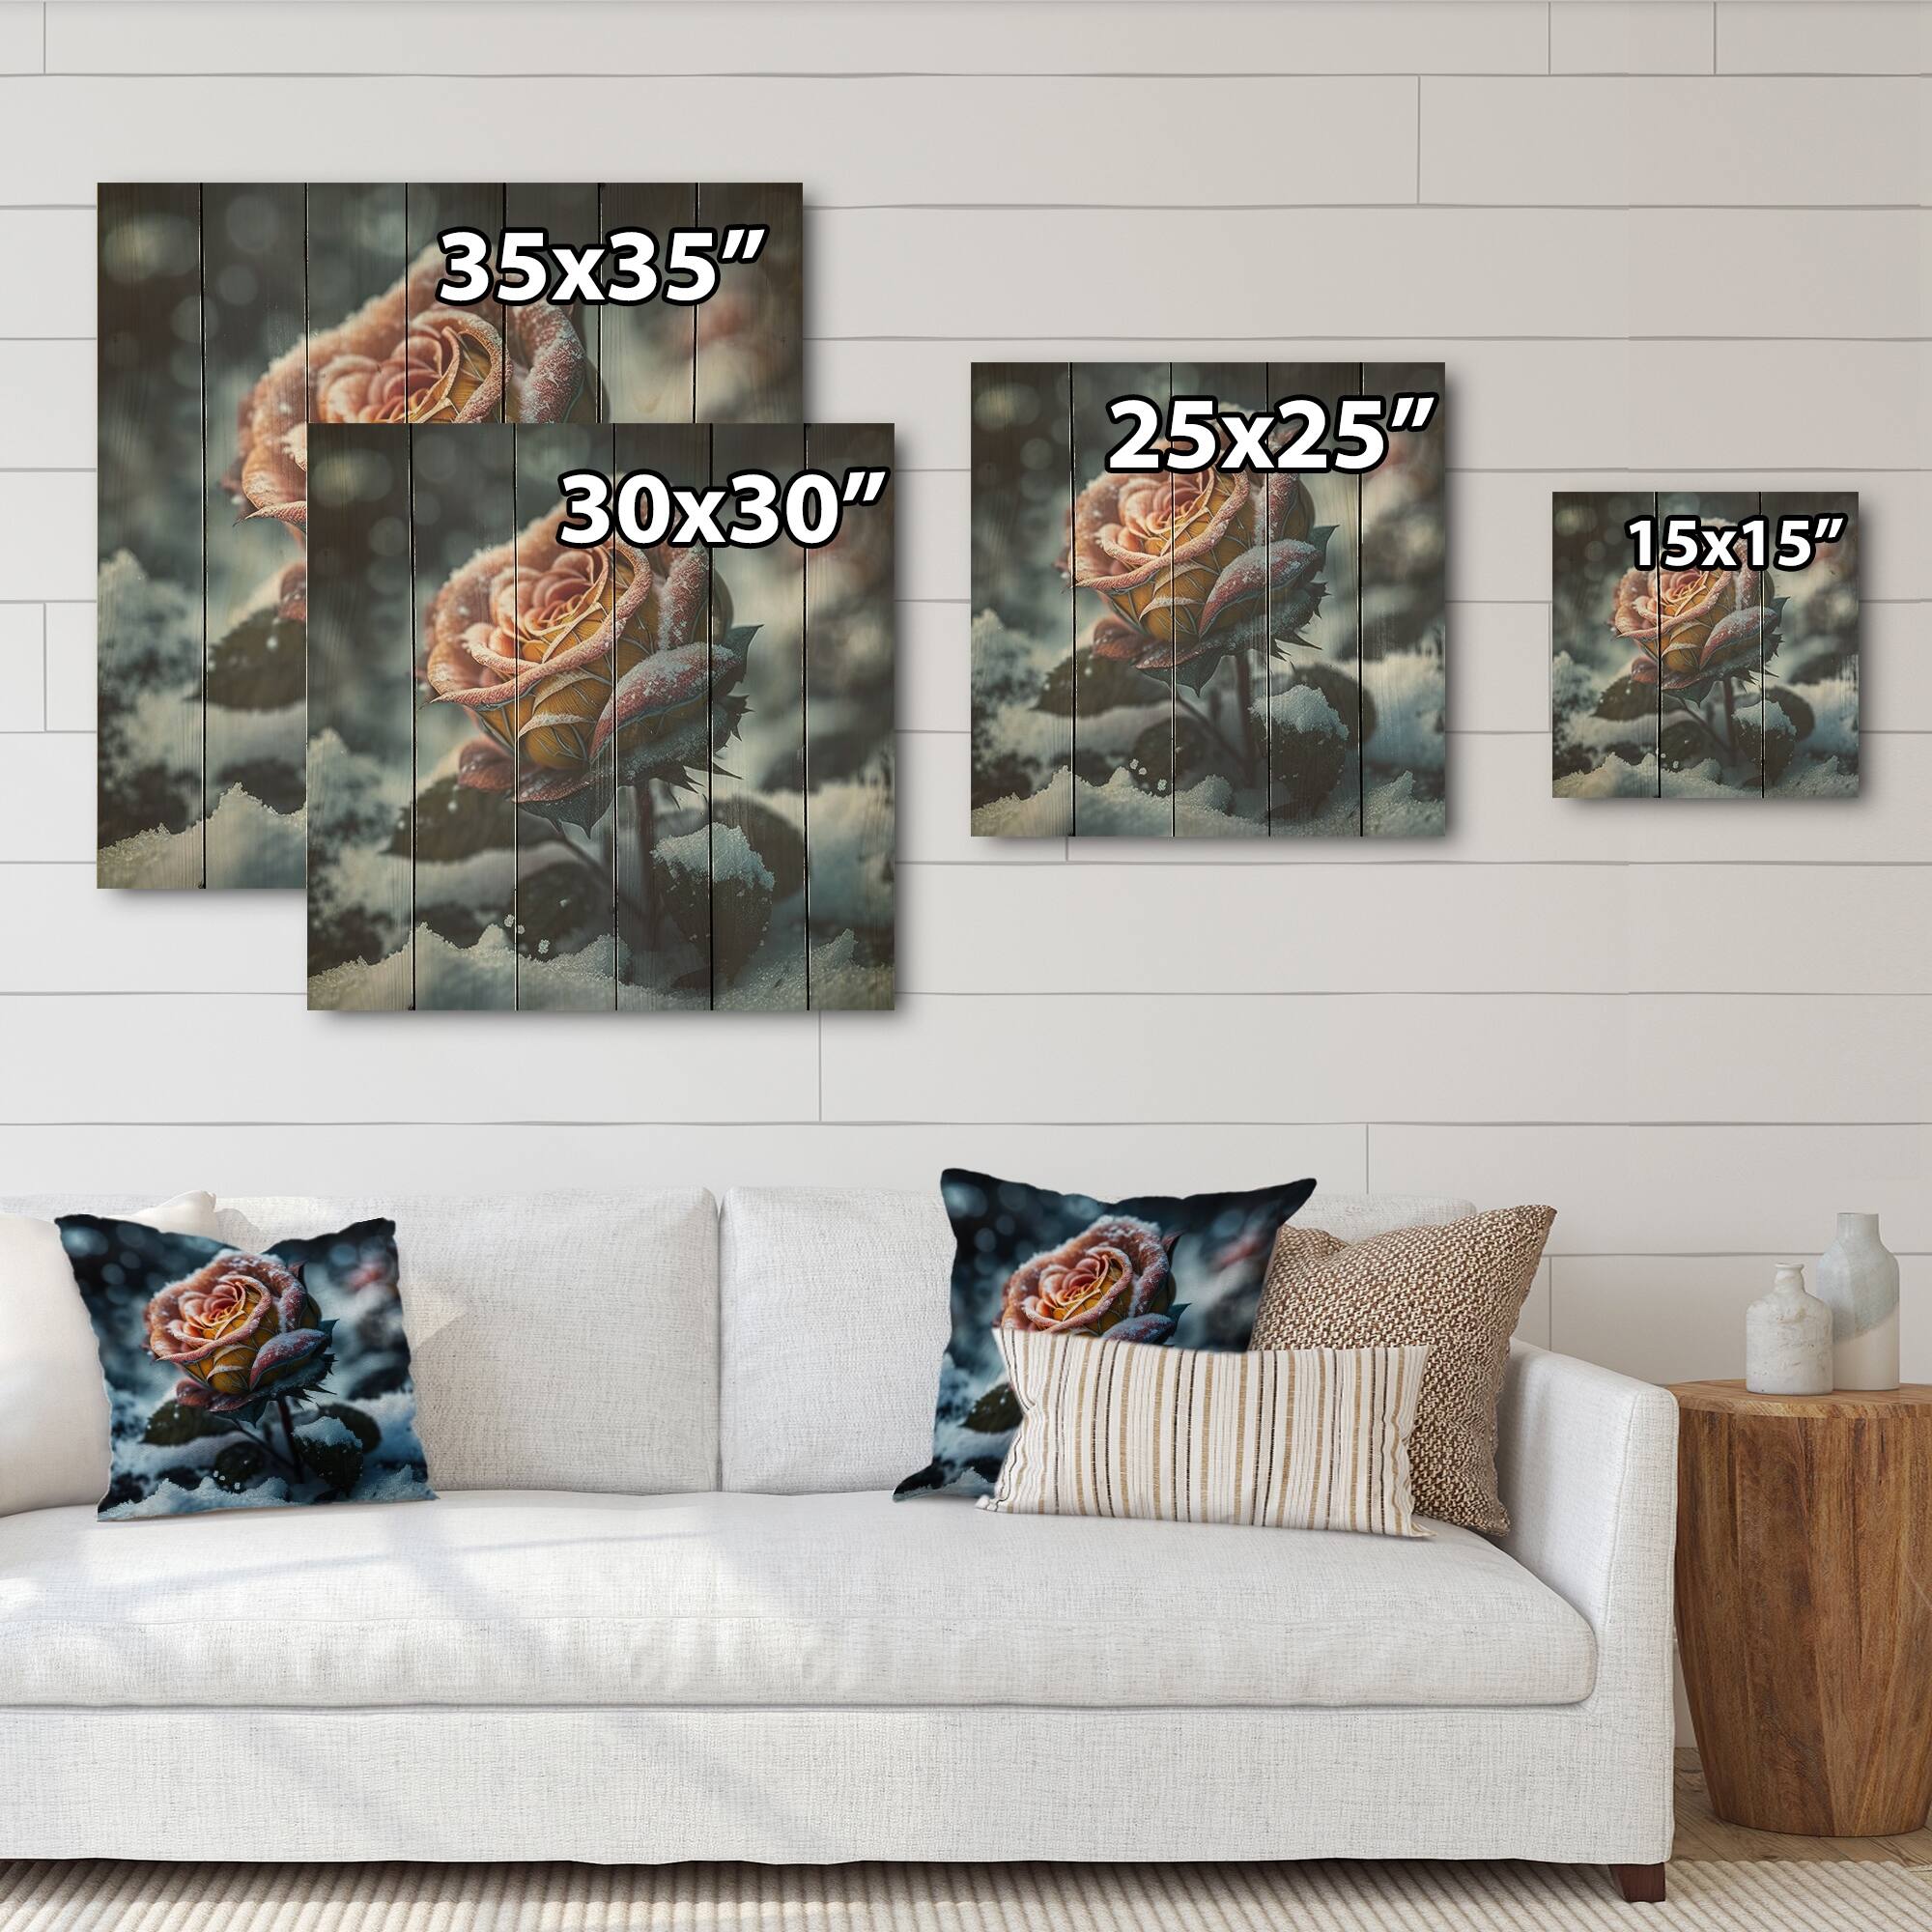 Designart 'A Blooming Rose Flower In A Forest I' Floral Peony Wood Wall ...